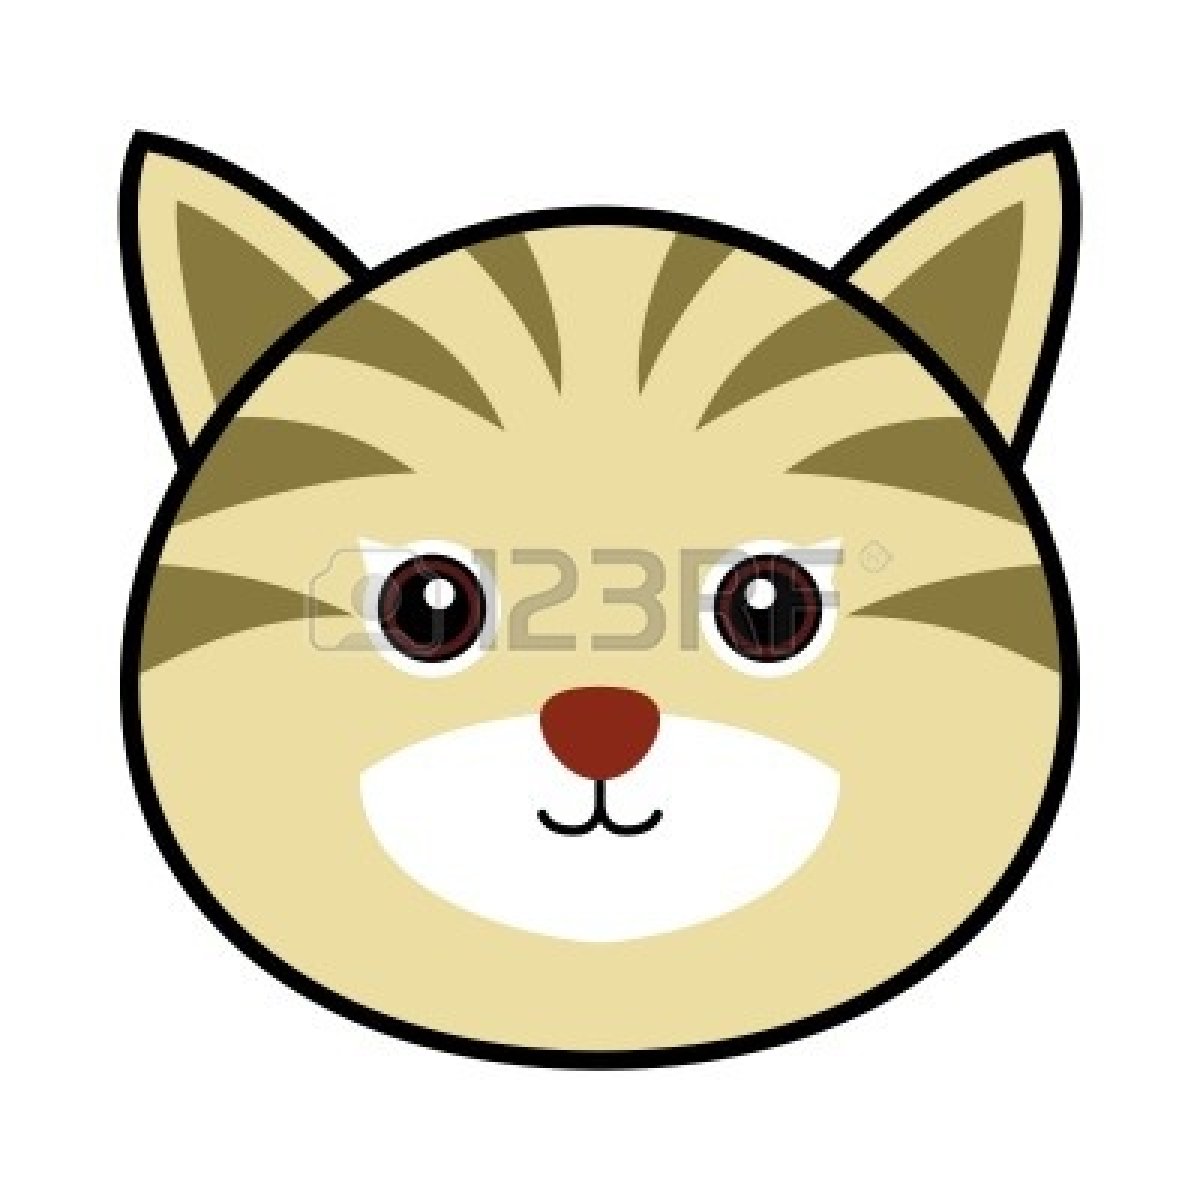 There Is 20 Sad Dog Face   Free Cliparts All Used For Free